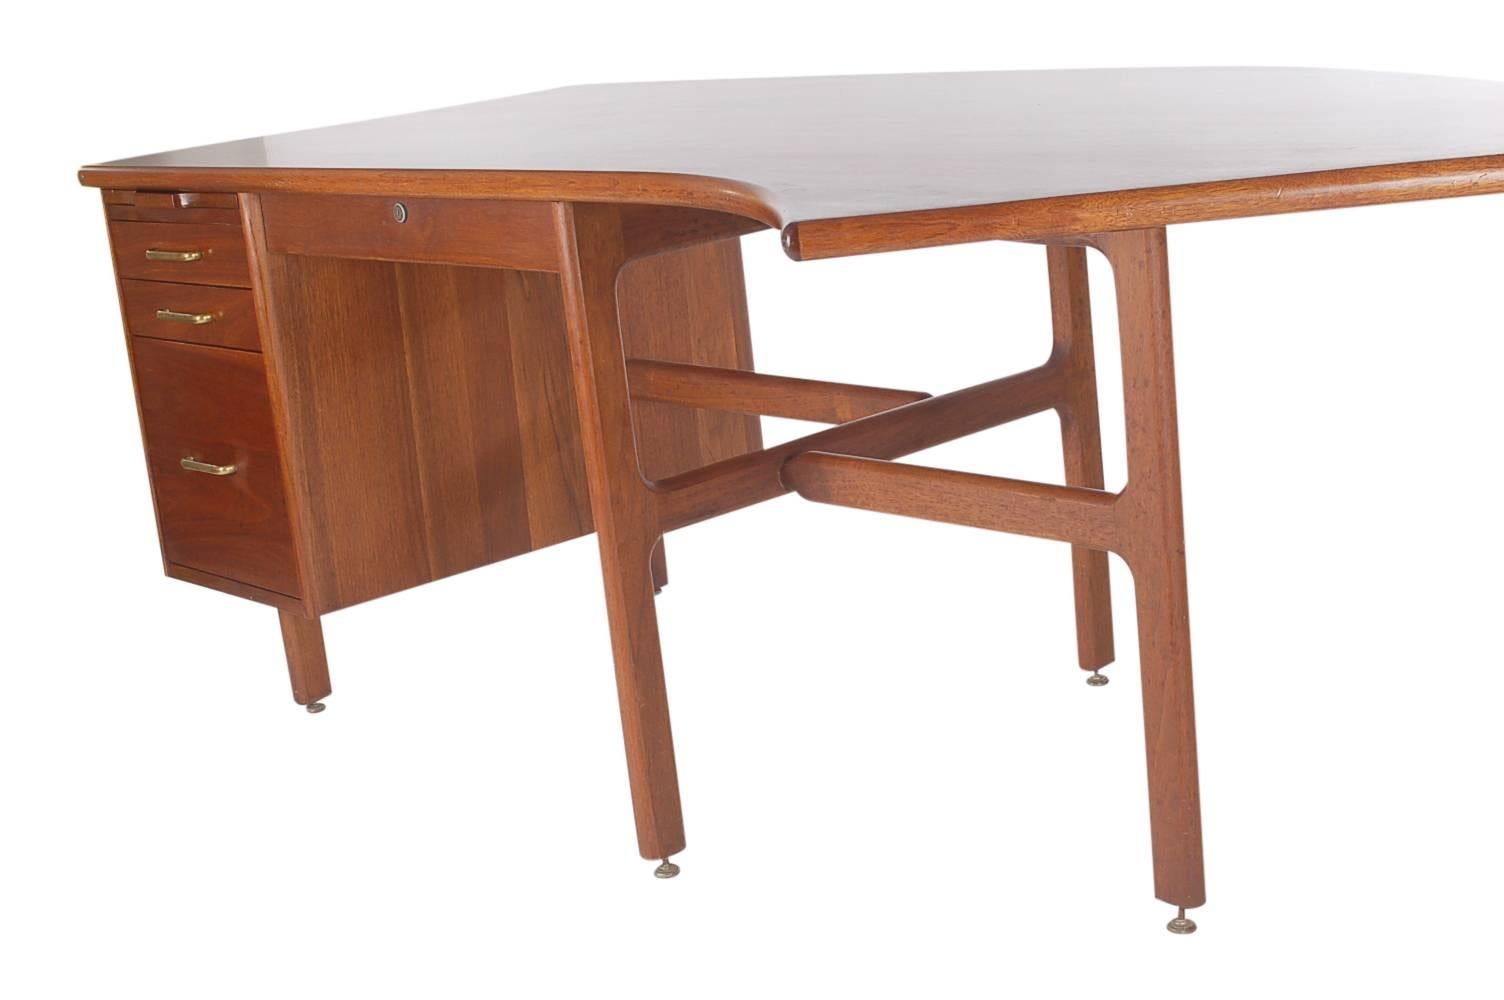 American Danish Style Mid-Century Modern Curved Executive Desk after Jens Risom